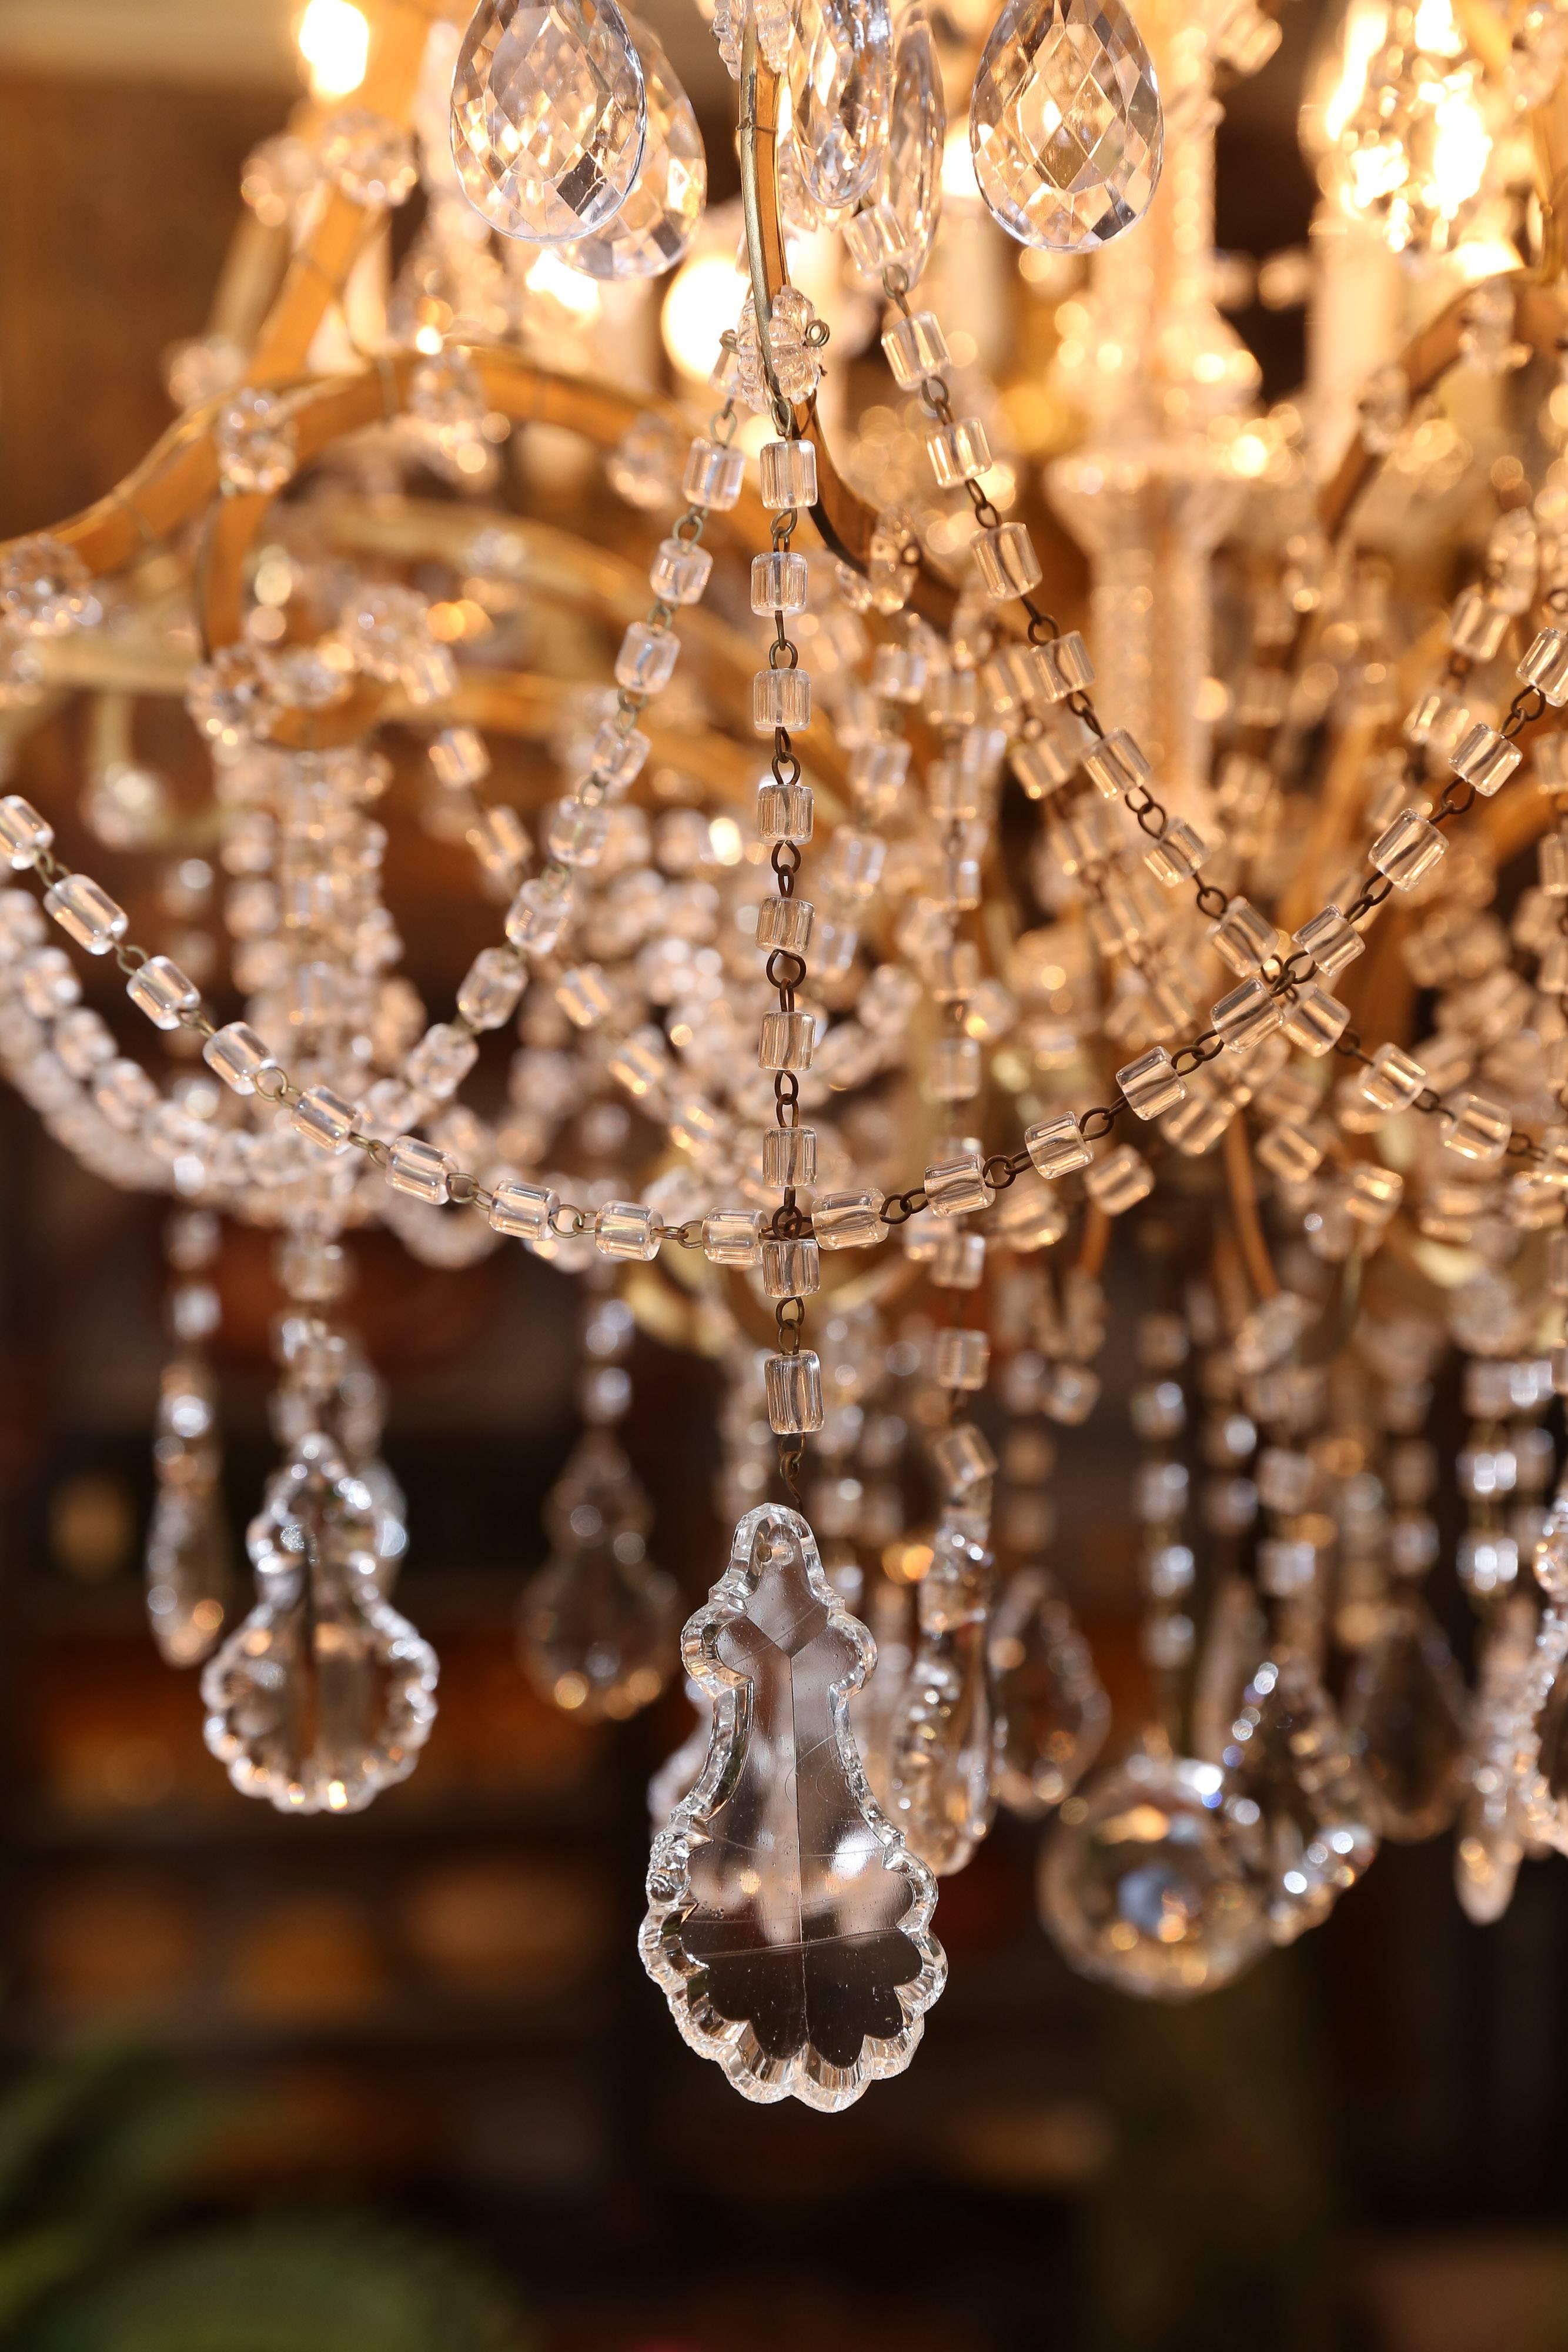 Beautiful two-tiered Italian chandelier has 18 arms, a brass cage and lots of crystal swags draping entire piece.

Each swag has a larger crystal suspended from each arm.

18 glass Bobeche have a row of beads with larger crystal, as